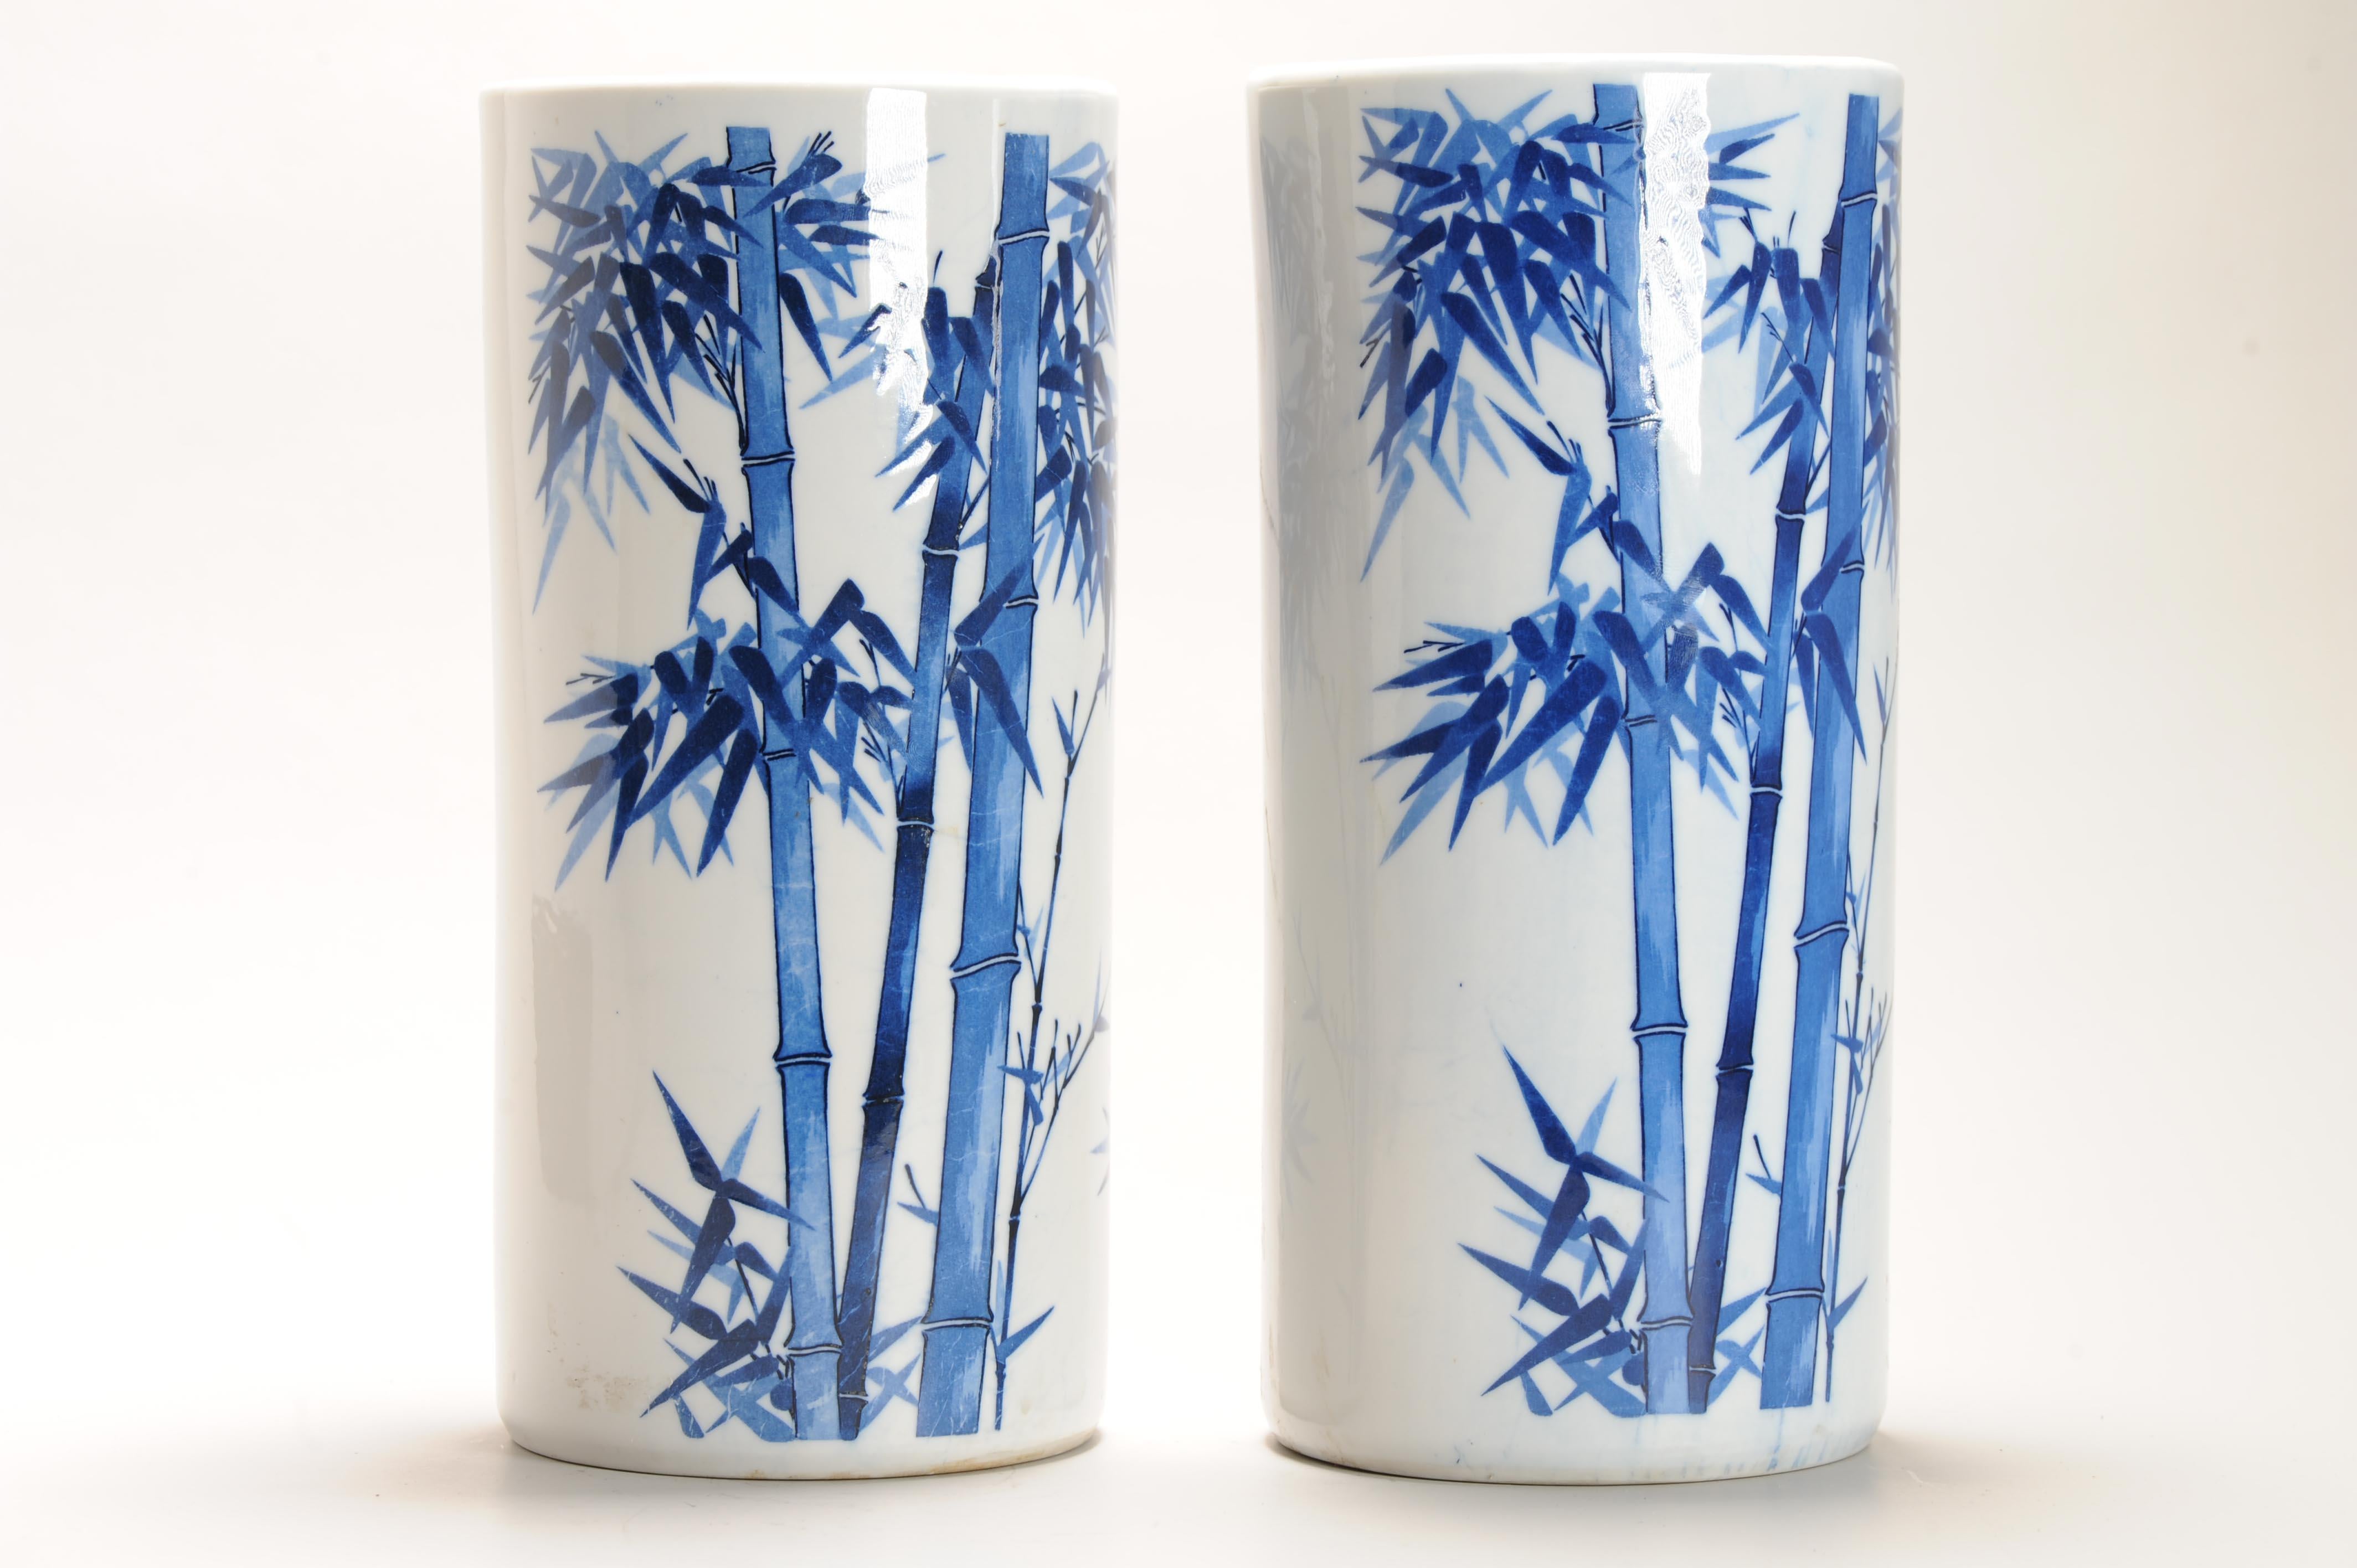 Fine Art Japanese Winter Bamboo Vases Arita Hat stand shap In Excellent Condition For Sale In Amsterdam, Noord Holland